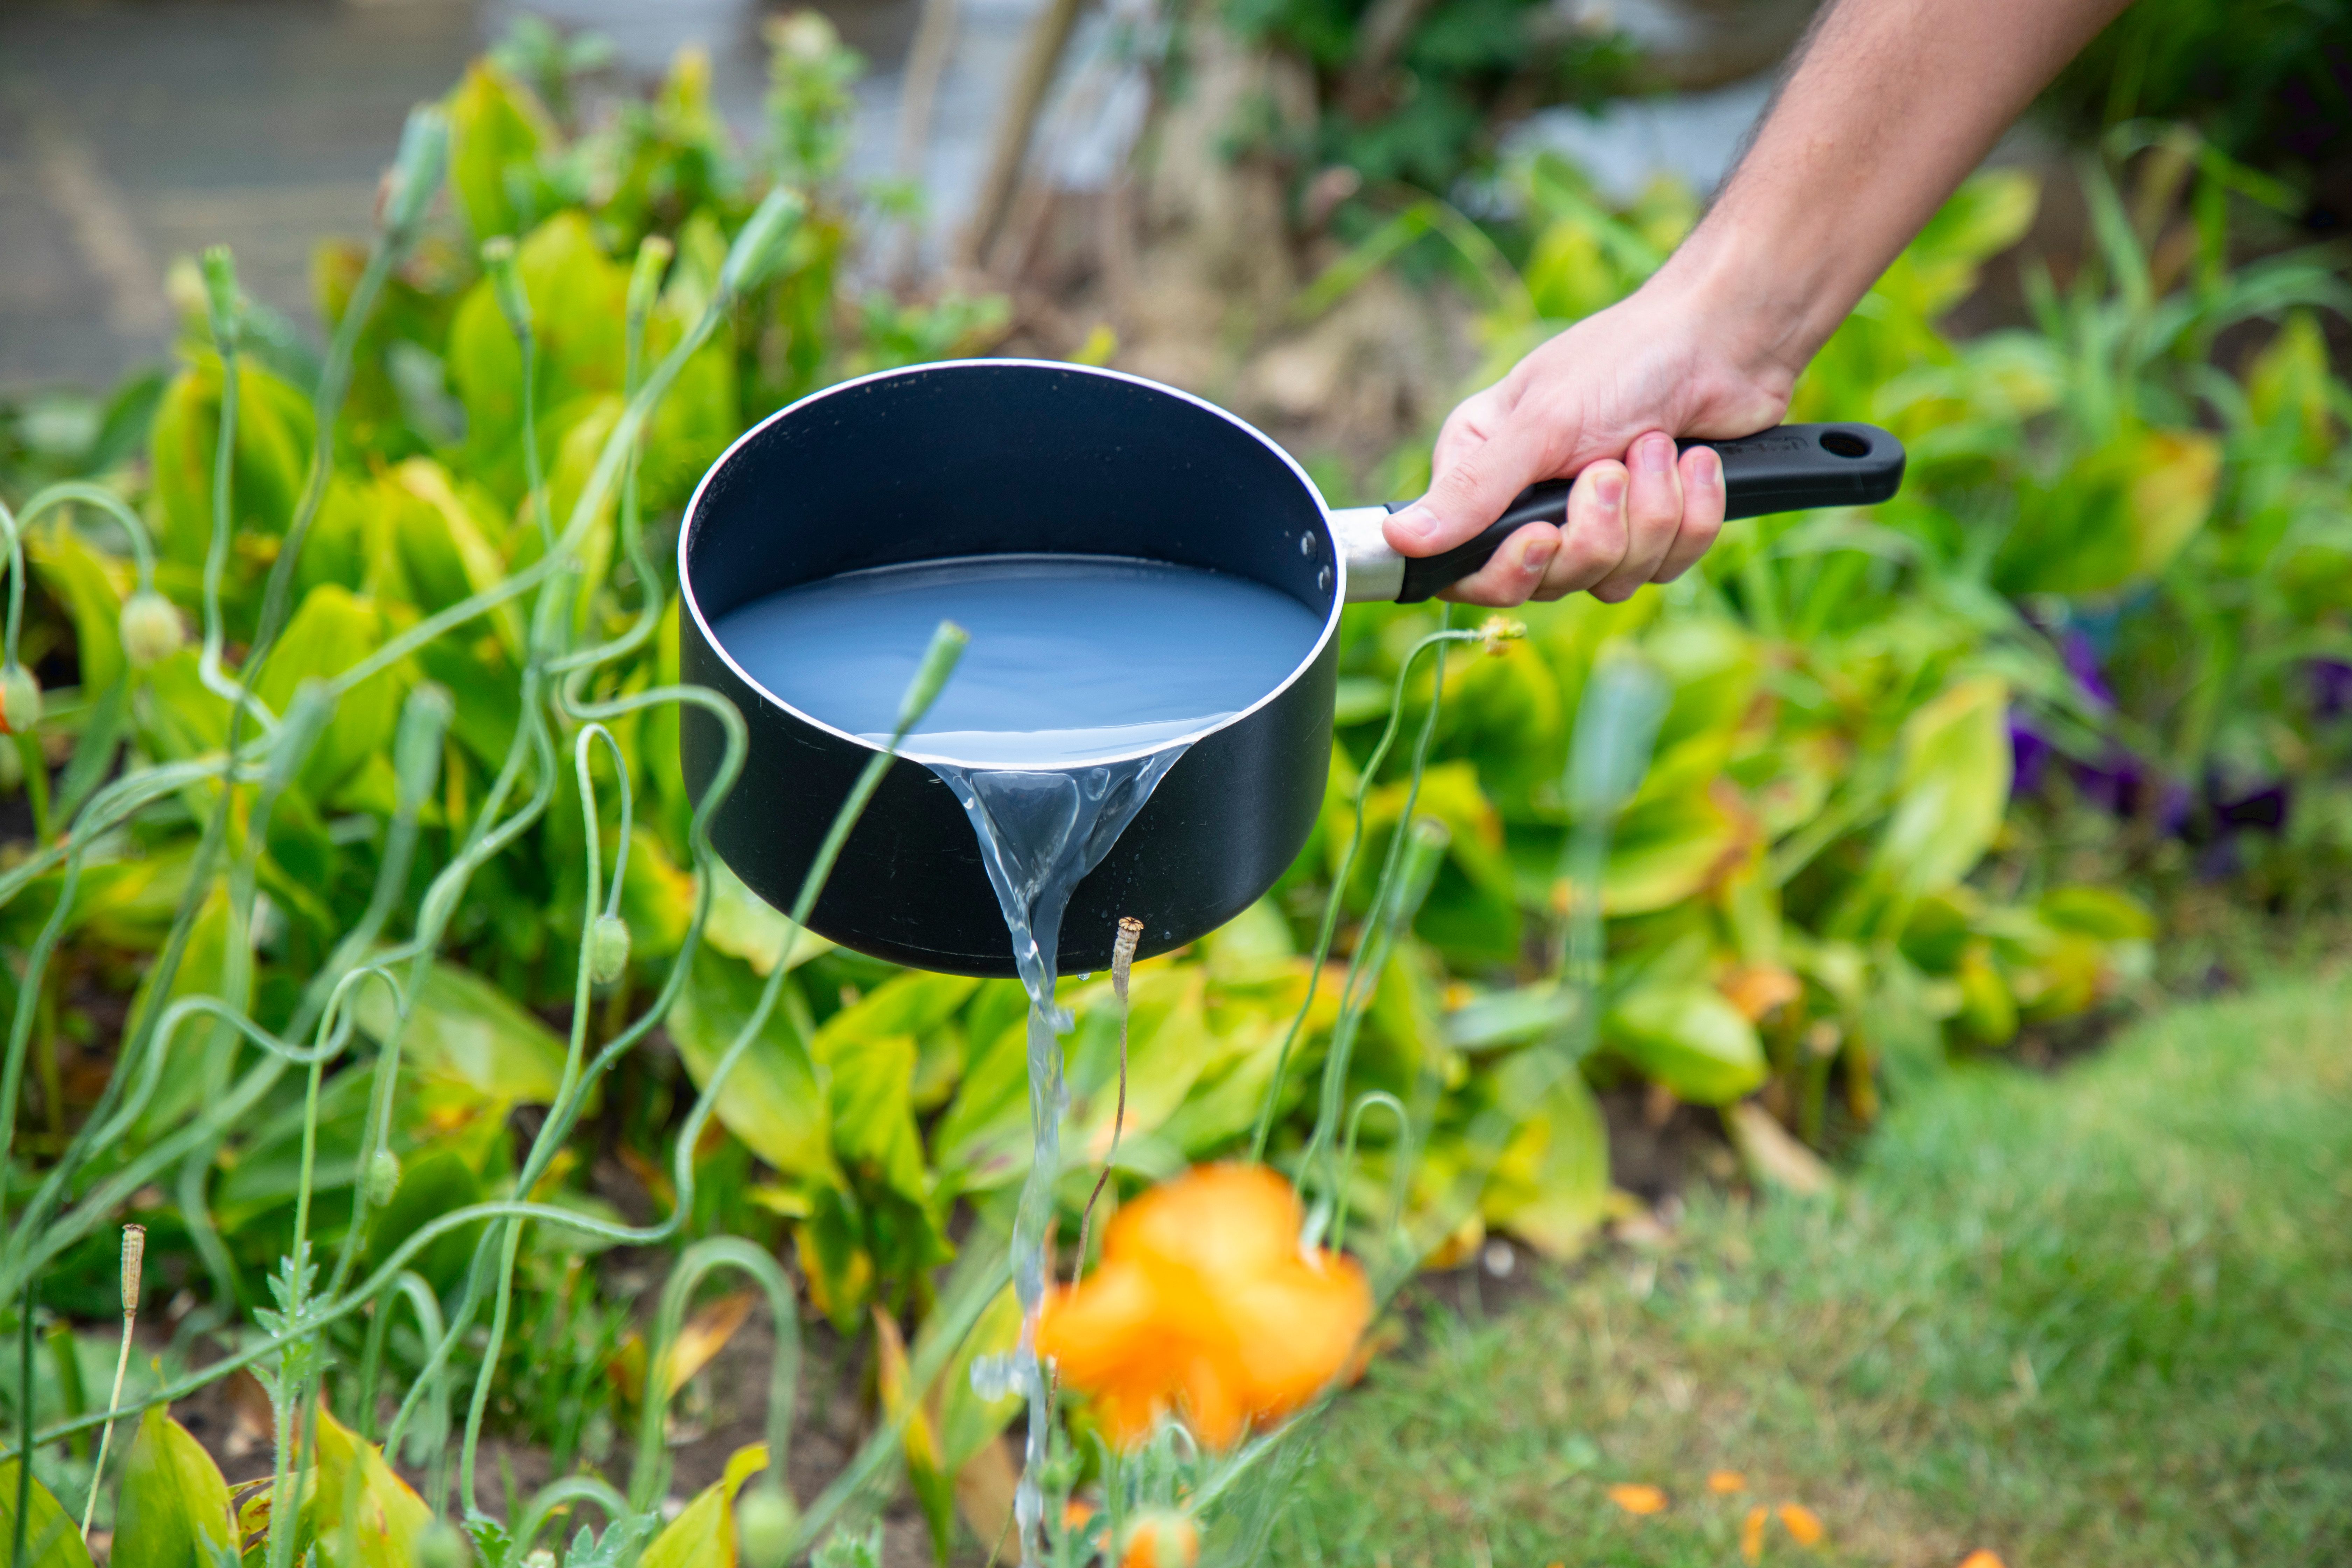 cooled cooking water being poured onto plants from a pan